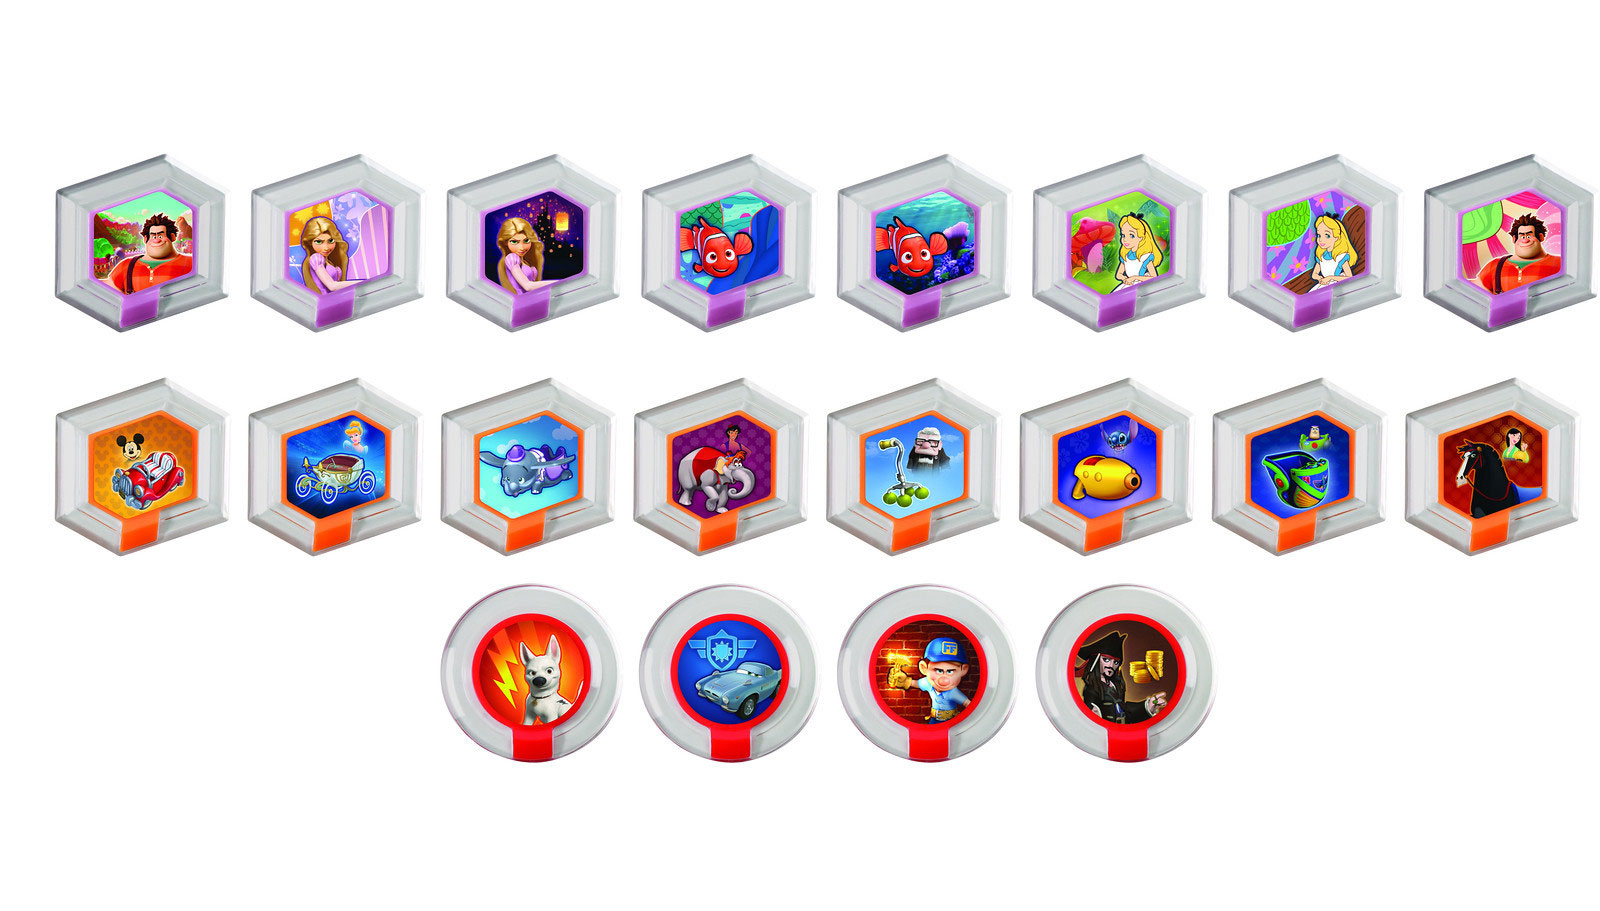 The Worst Feature Of Disney Infinity? These Power Discs.